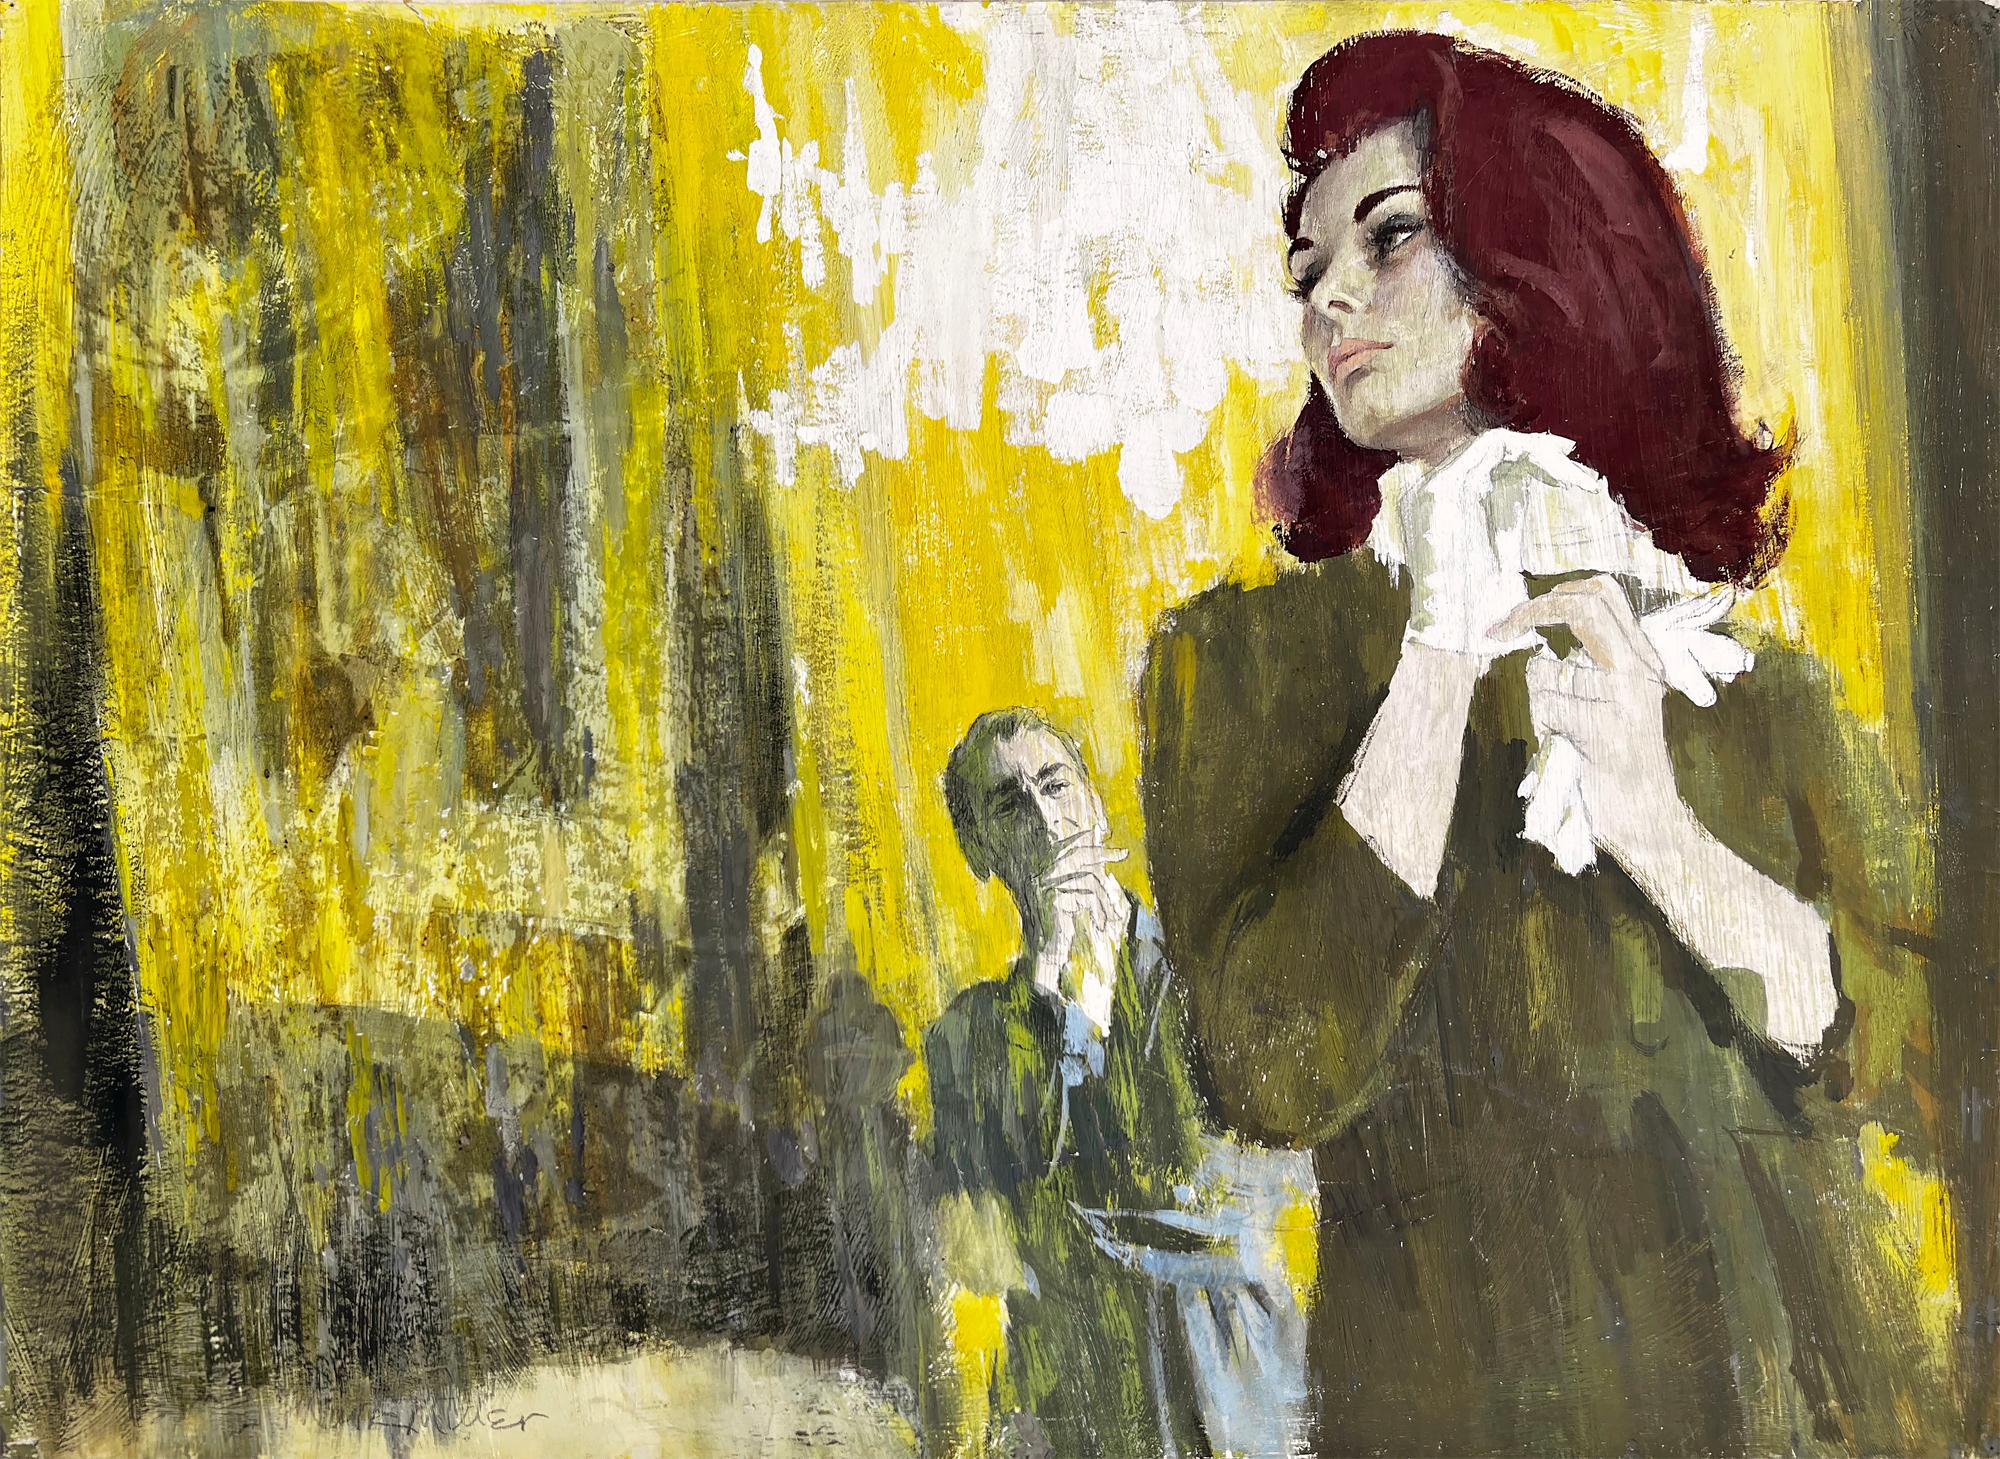 Mark Miller Figurative Painting - Golden Age of Illustration Romance Story, Man Woman Relationship - Green Yellow